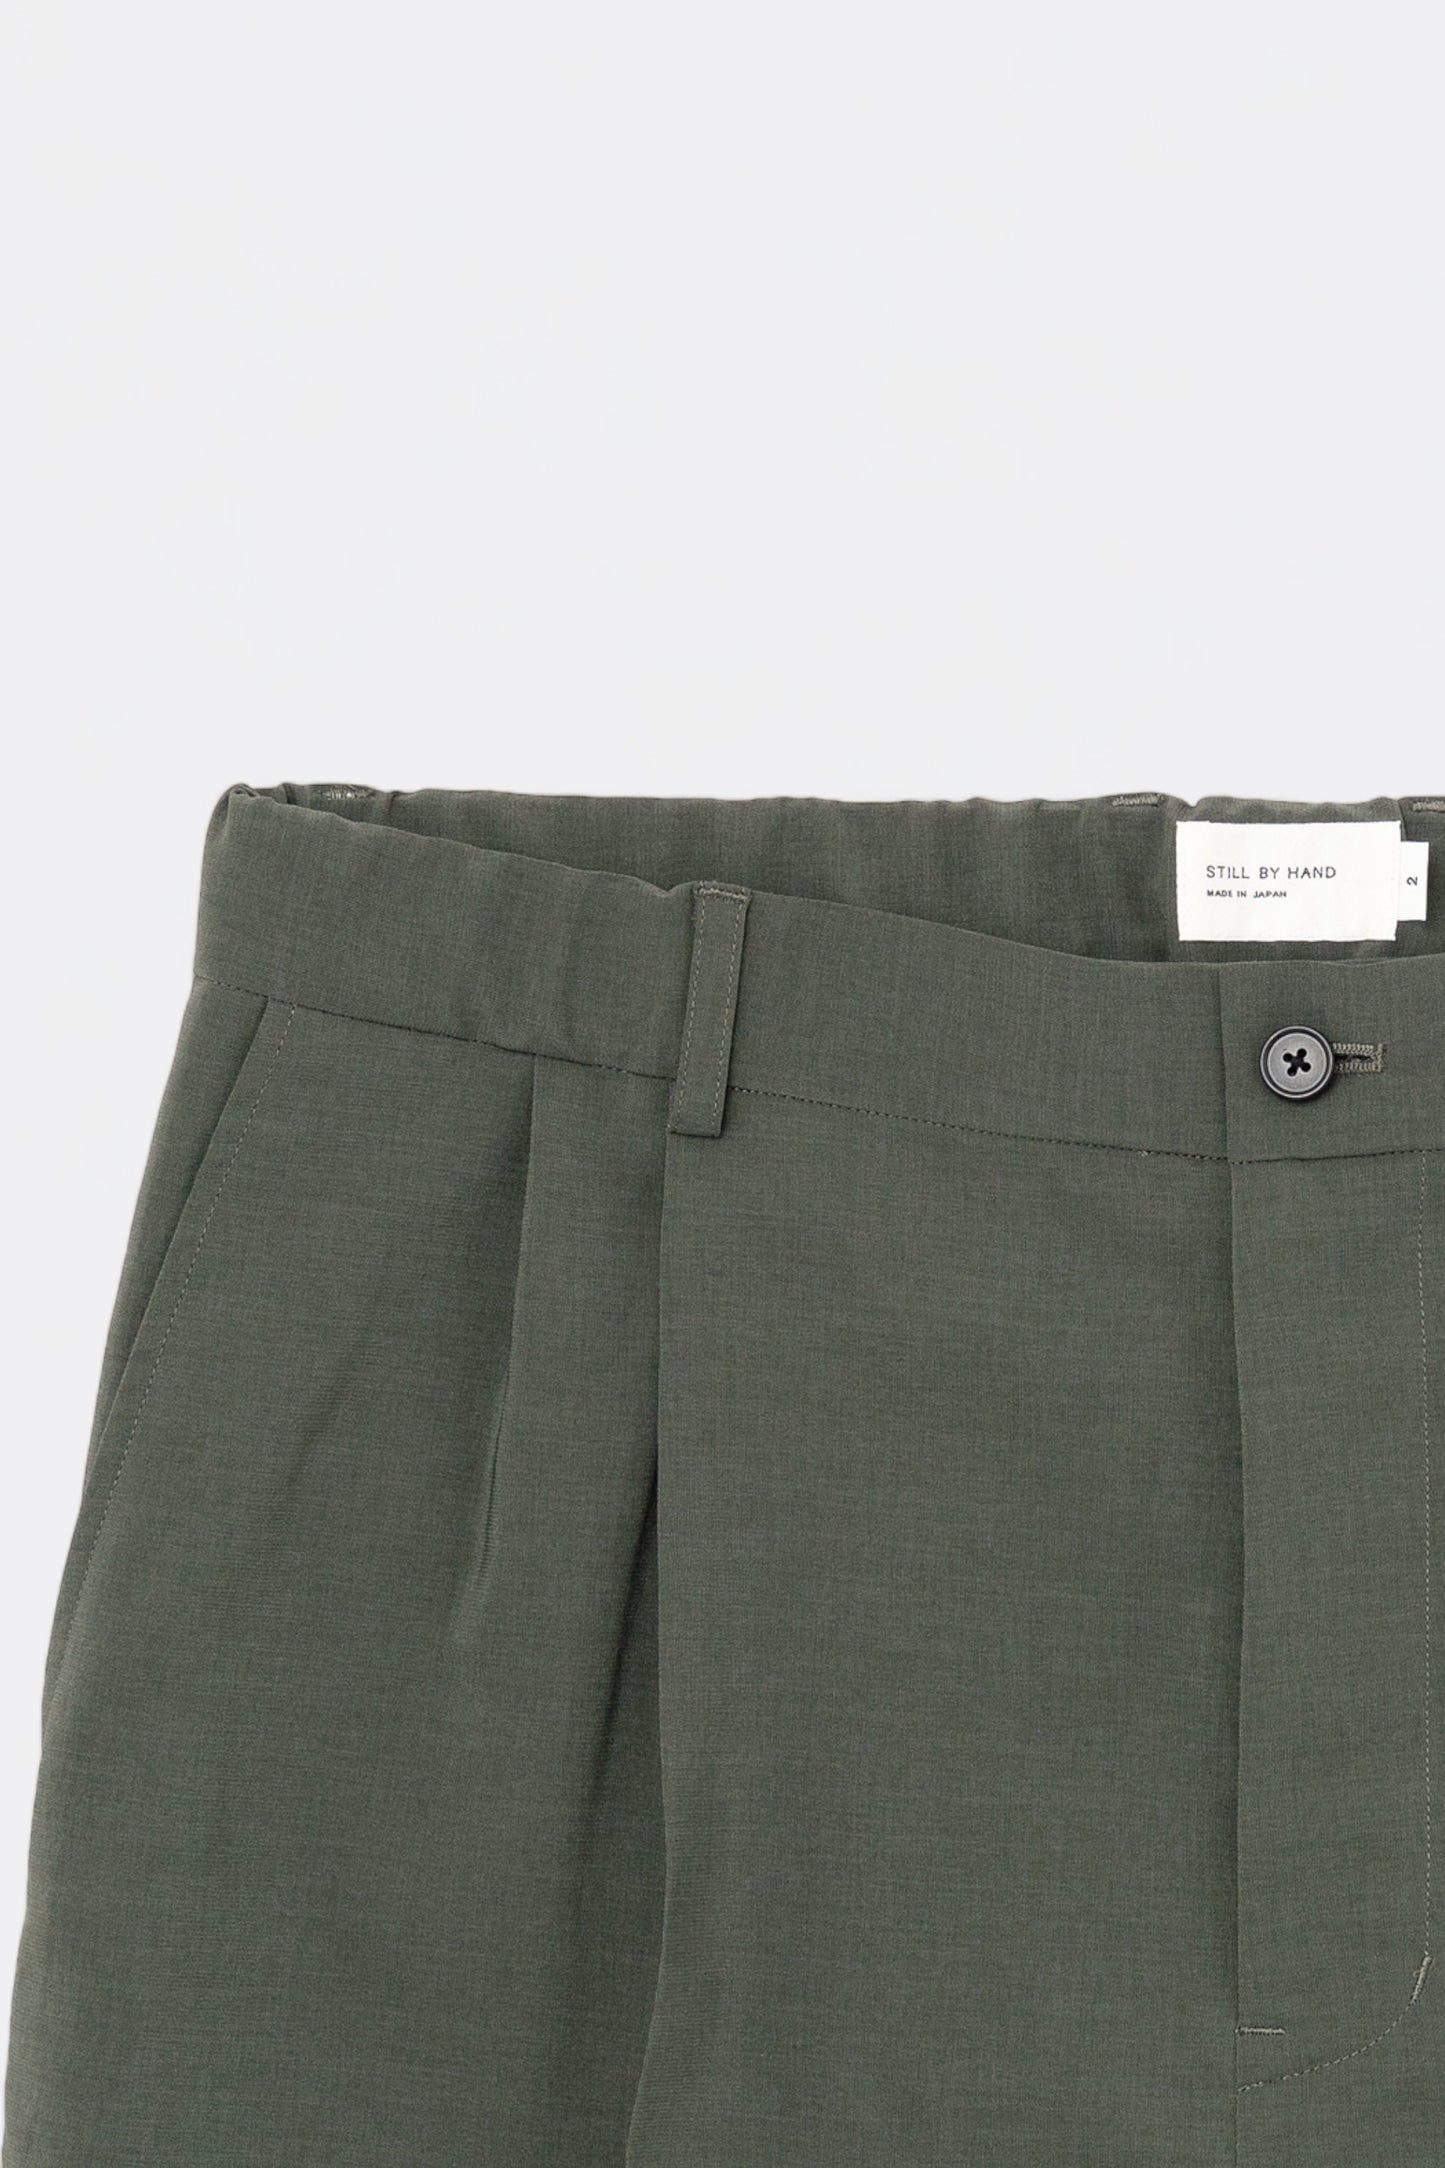 Still By Hand - Pressed Relaxed Pants (Olive)